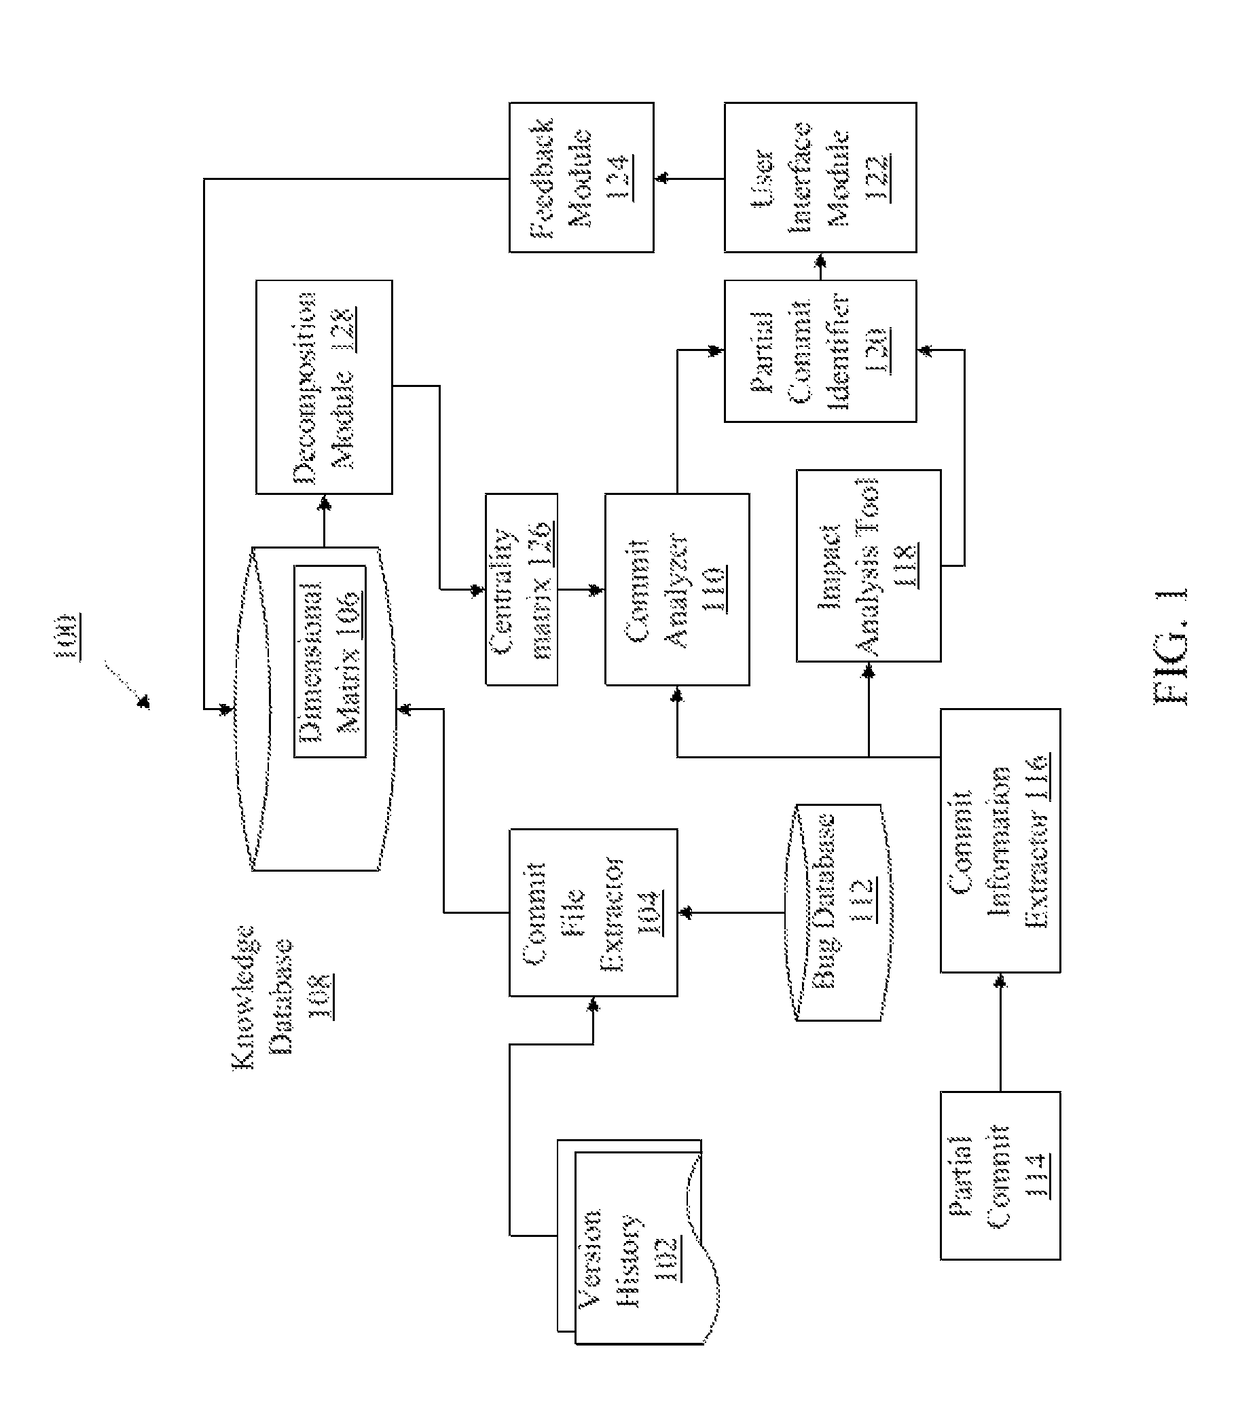 Methods, systems and computer-readable media for detecting a partial commit